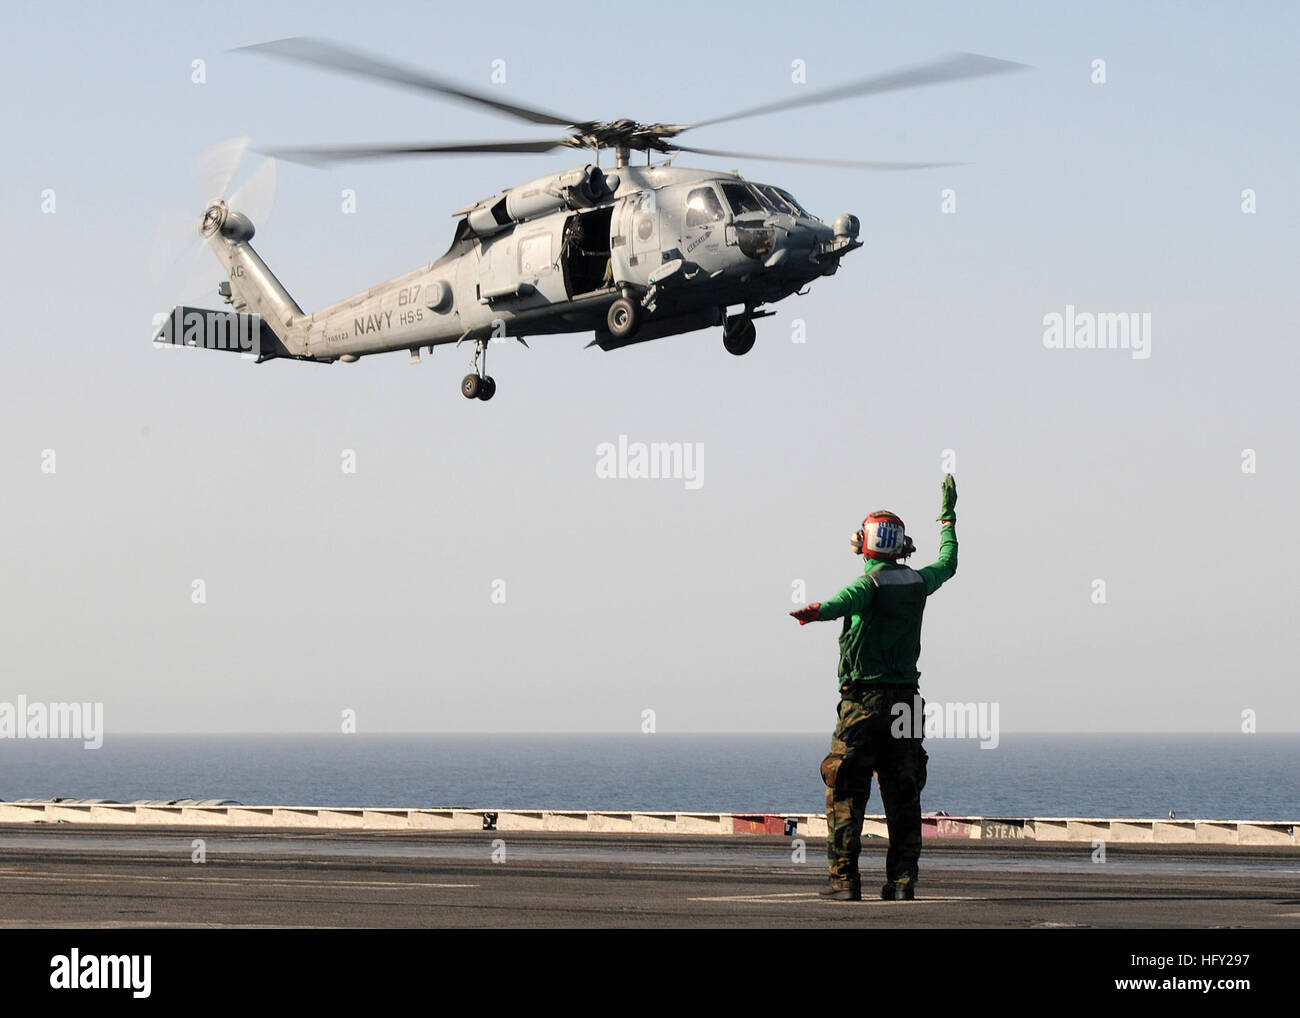 100216-N-4236E-032 GULF OF OMAN (Feb. 16, 2010) A Sailor directs the landing of an HH-60H Sea Hawk helicopter assigned to the Nightdippers of Helicopter Anti-Submarine Squadron (HS) 5 aboard the Nimitz-class aircraft carrier USS Dwight D. Eisenhower (CVN 69). Dwight D. Eisenhower is conducting a scheduled six-month deployment as a part of the on-going rotation of forward-deployed forces. (U.S. Navy photo by Mass Communication Specialist 3rd Class Chad R. Erdmann/Released) US Navy 100216-N-4236E-032 A Sailor directs the landing of an HH-60H Sea Hawk helicopter assigned to the Nightdippers of He Stock Photo